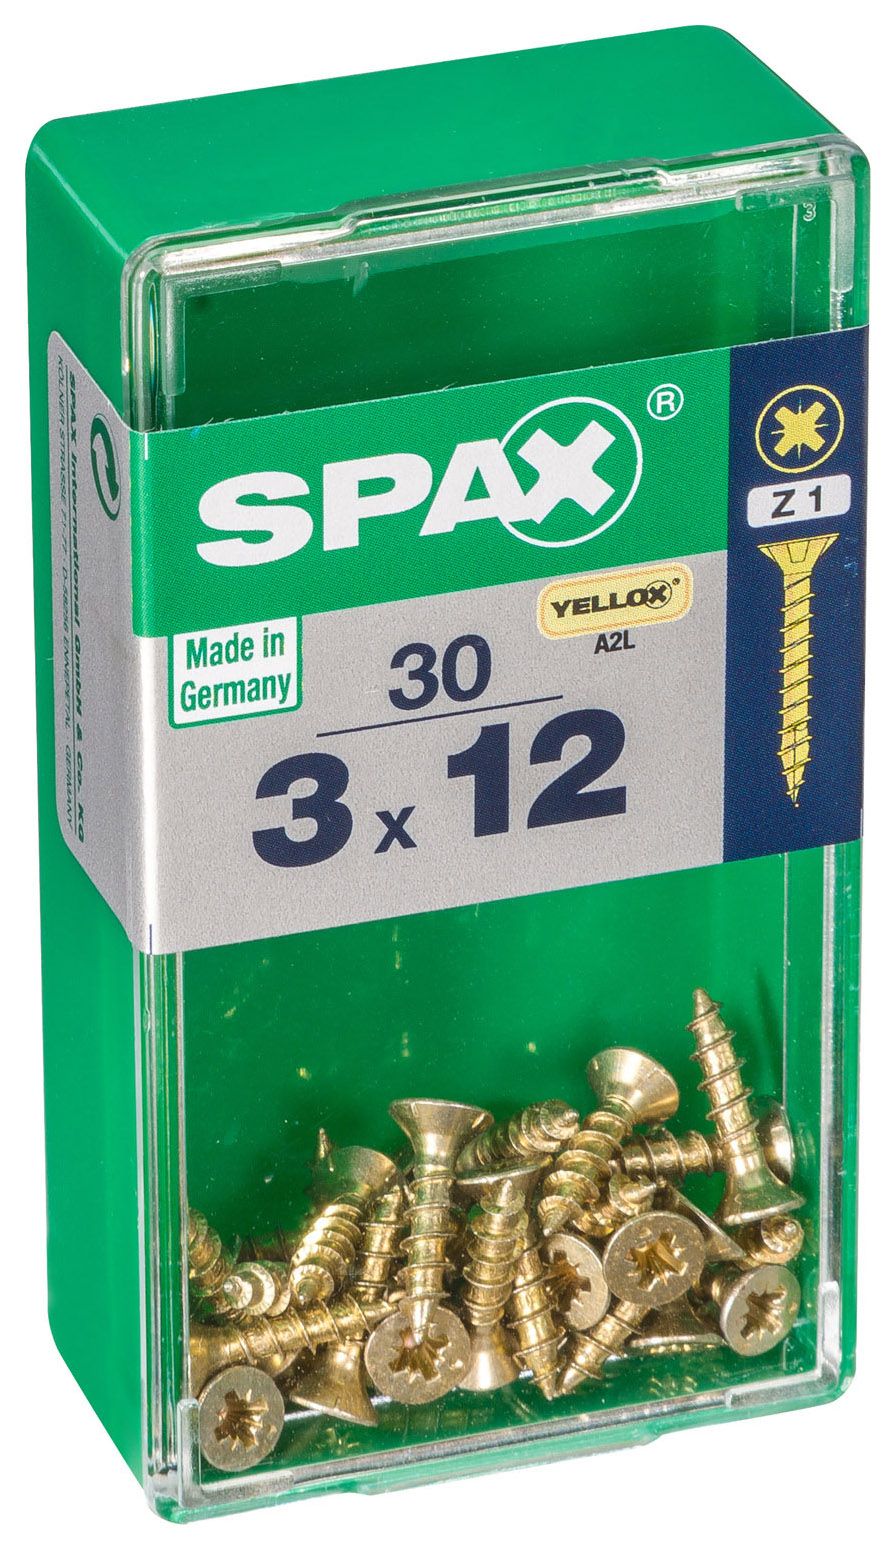 Image of Spax PZ Countersunk Zinc Yellow Screws - 3 x 12mm Pack of 30